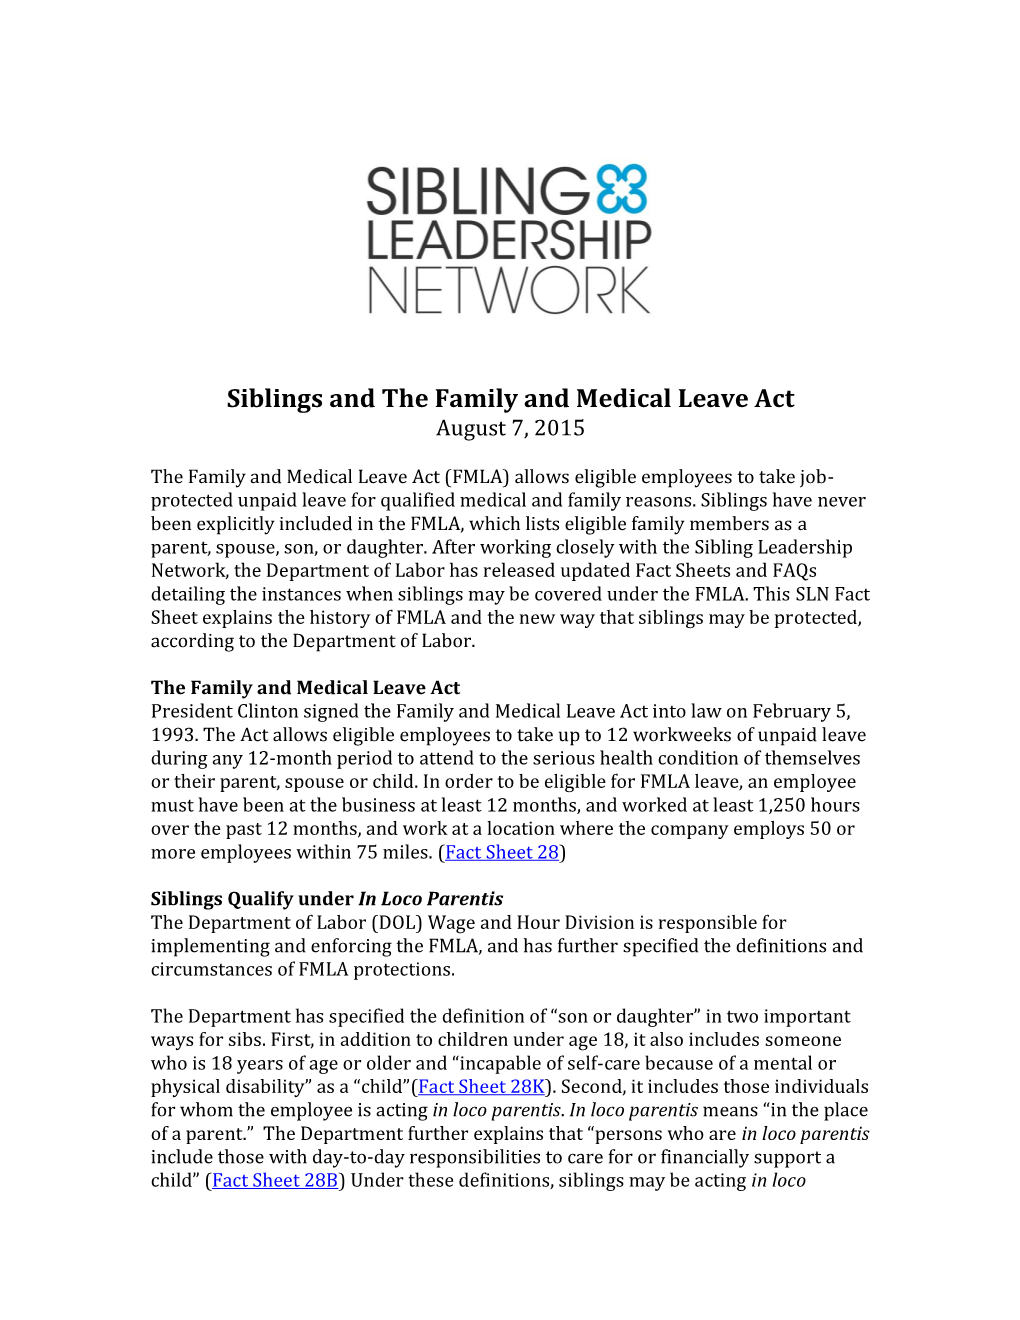 Siblings and the Family and Medical Leave Act August 7, 2015